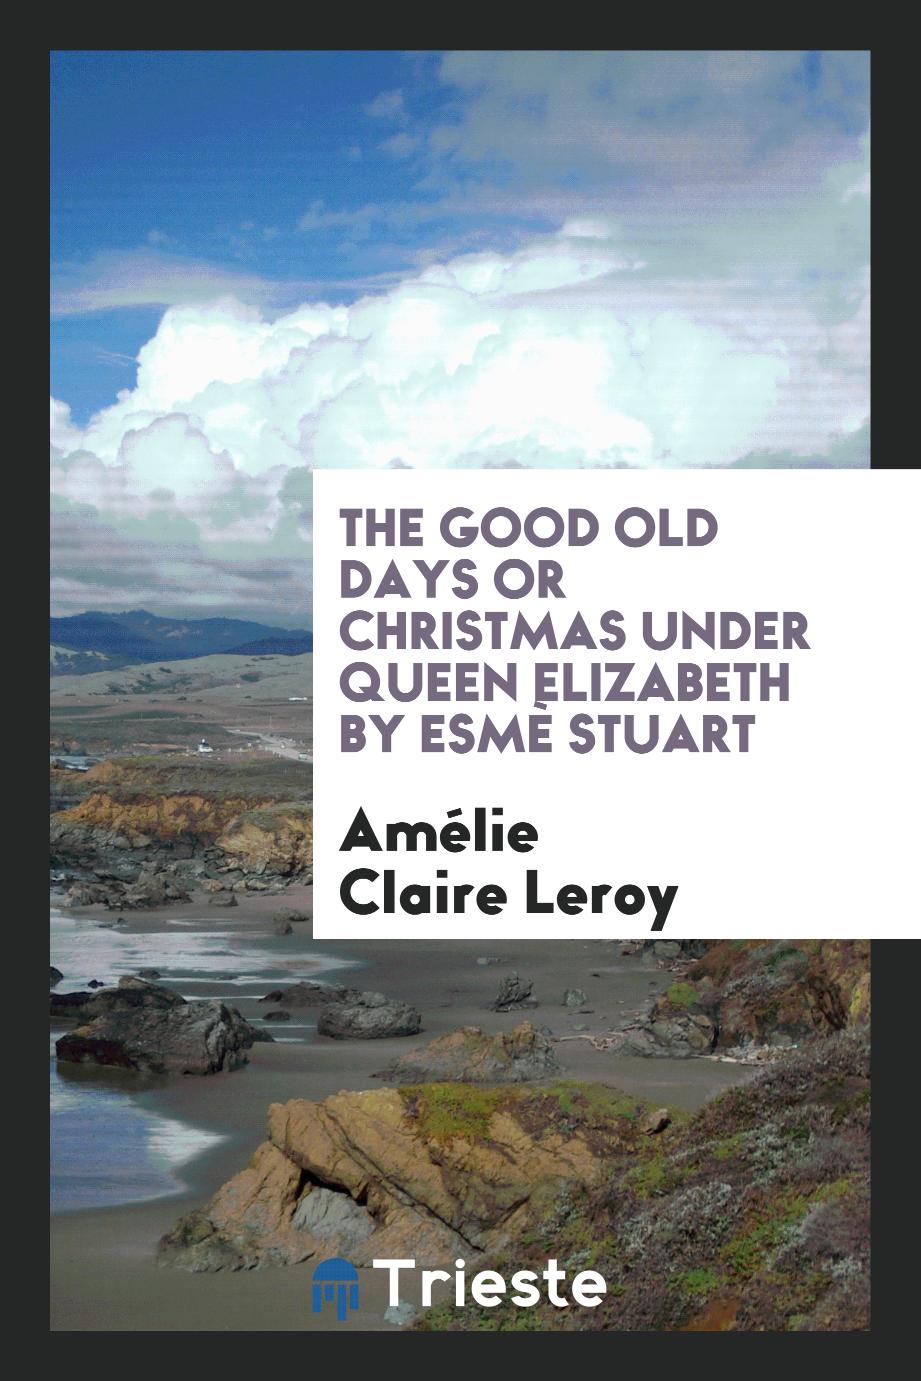 The Good Old Days or Christmas under Queen Elizabeth by Esmè Stuart